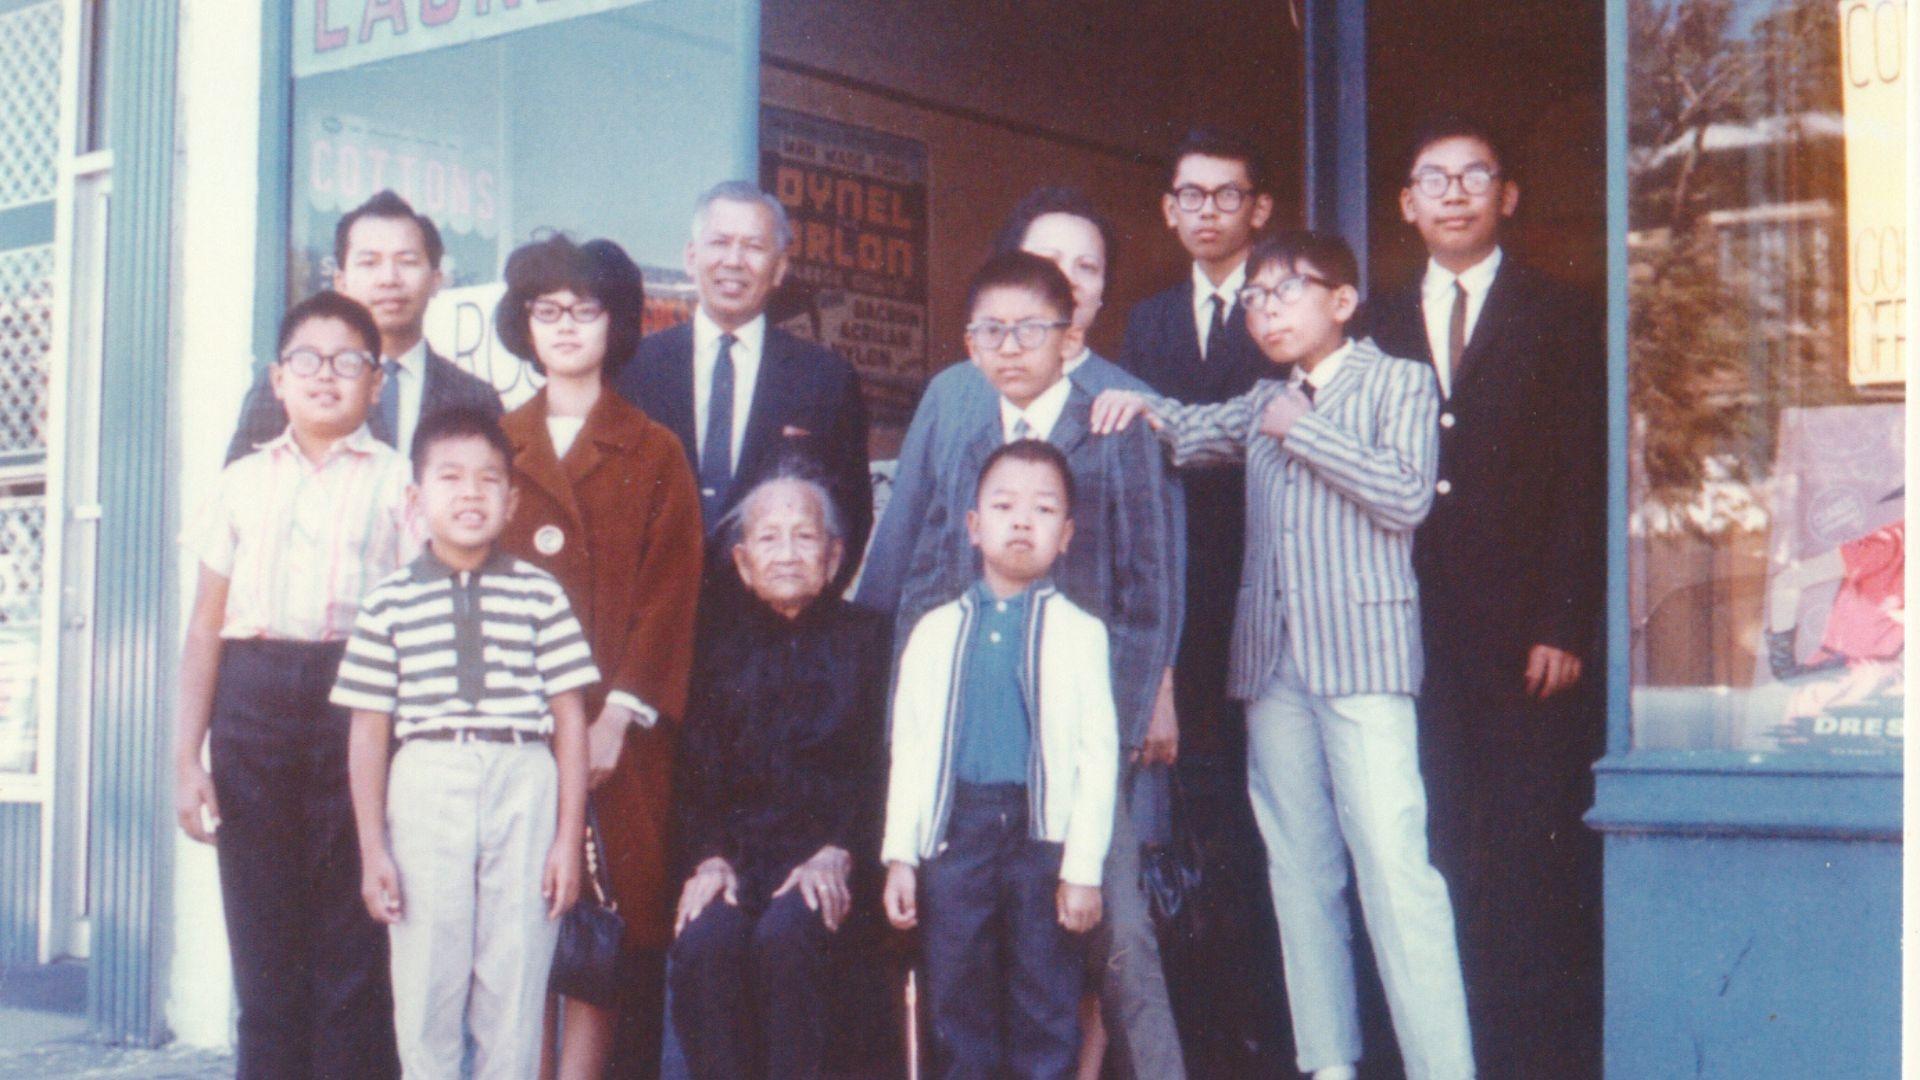 Corky Lee and his family gather for a portrait in front of their laundry in Queens, NY. (Lee is third from the right in suit and tie in back row.)